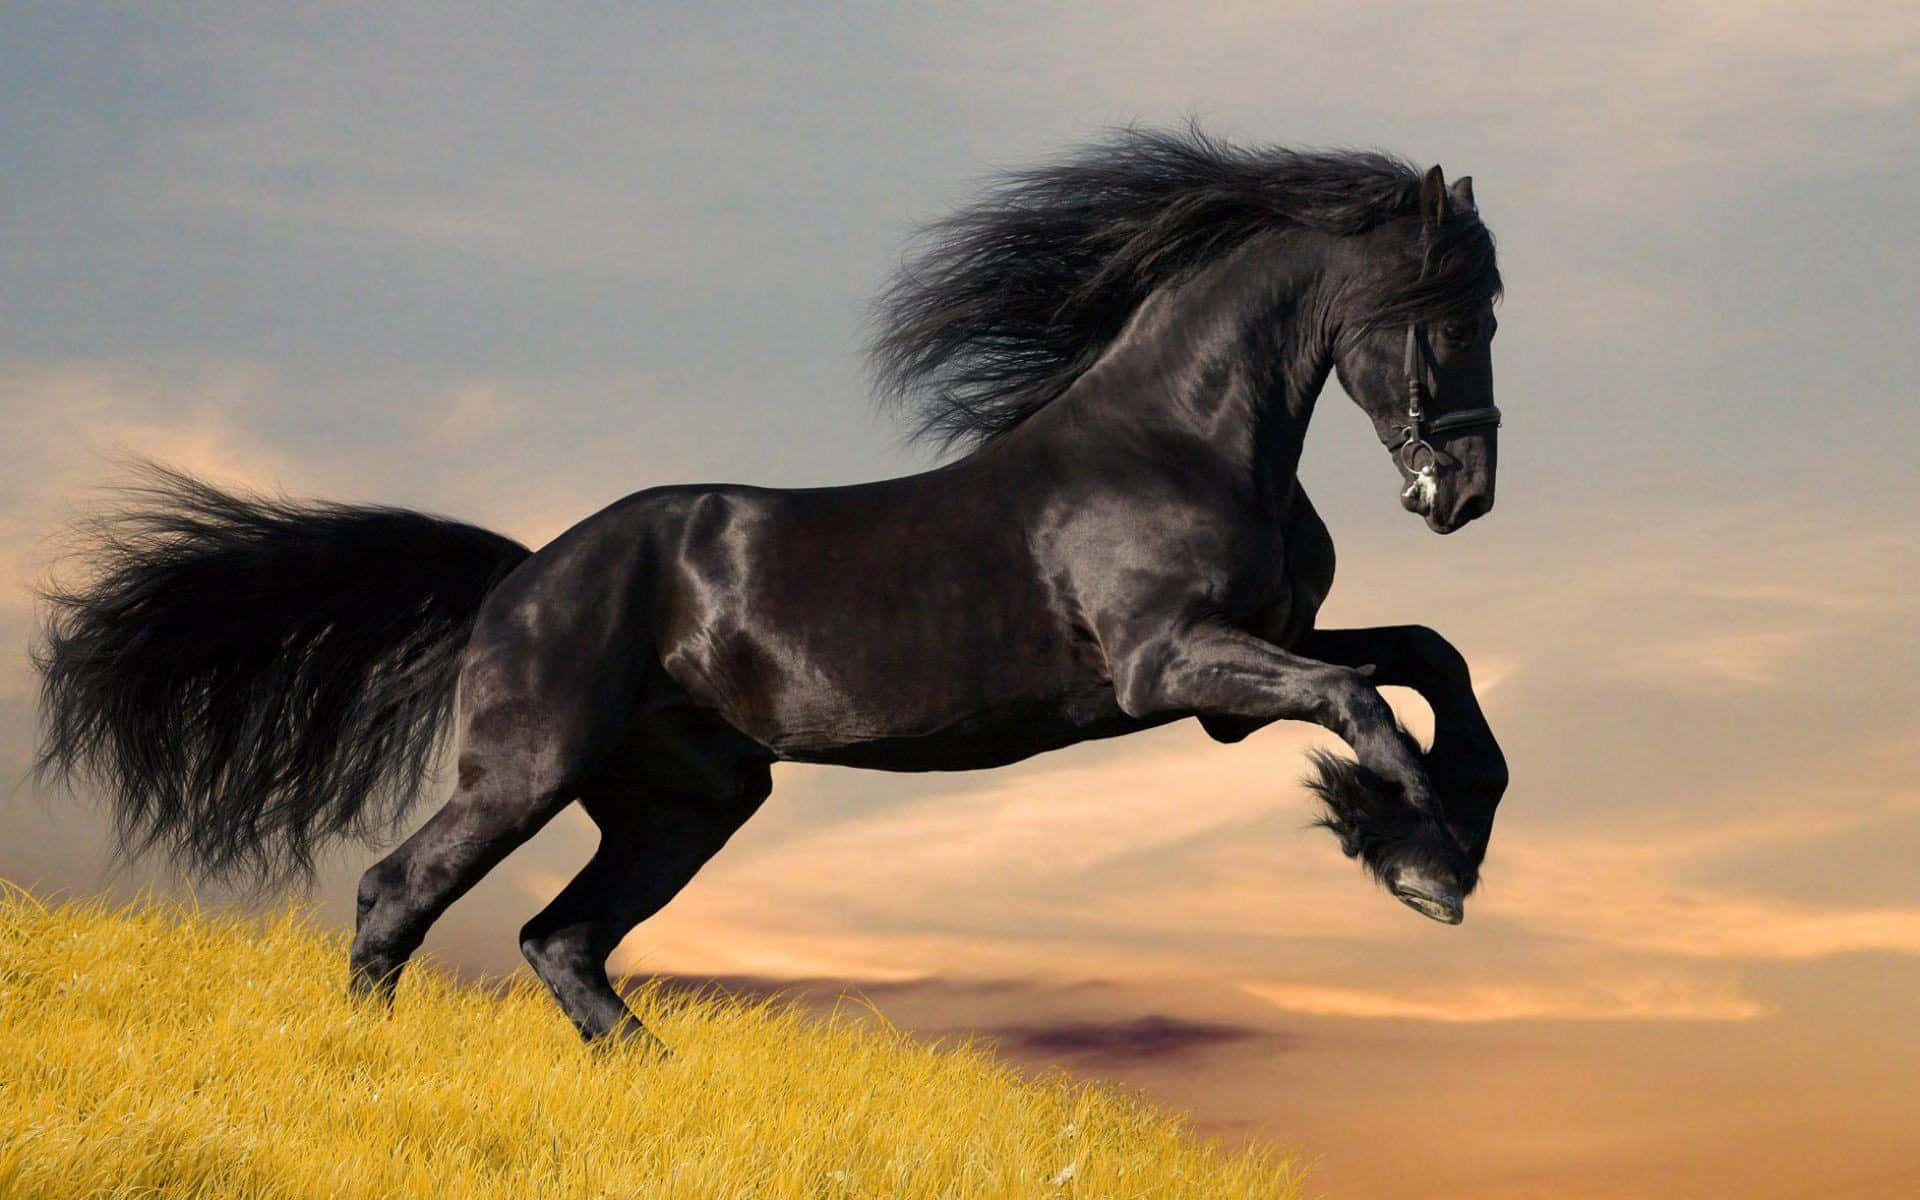 Mustang Horse Black Galloping Picture